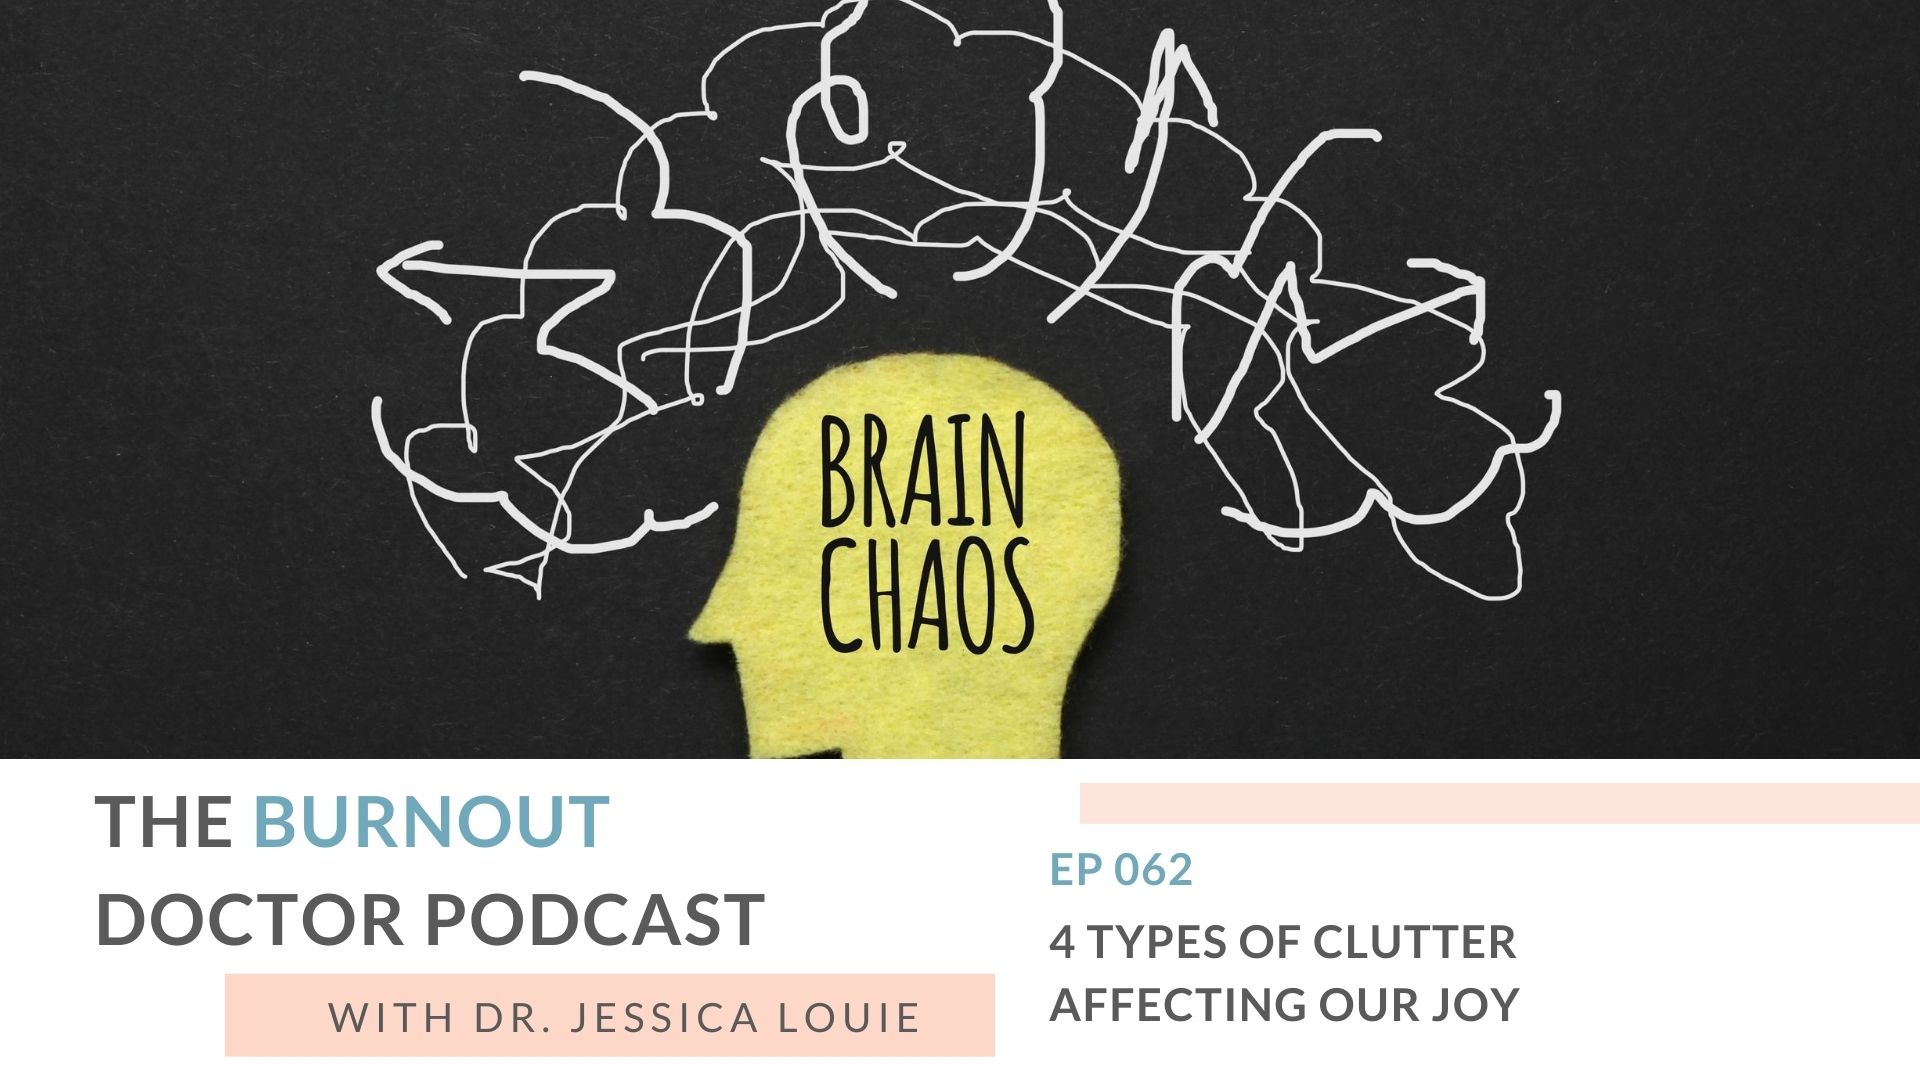 4 types of clutter affecting joy each day, how clutter relates to burnout and stress, clutter affects our parenting and making memories with family, simplifying for healthcare families, The Burnout Doctor Podcast and Marie Kondo Clutter mental health